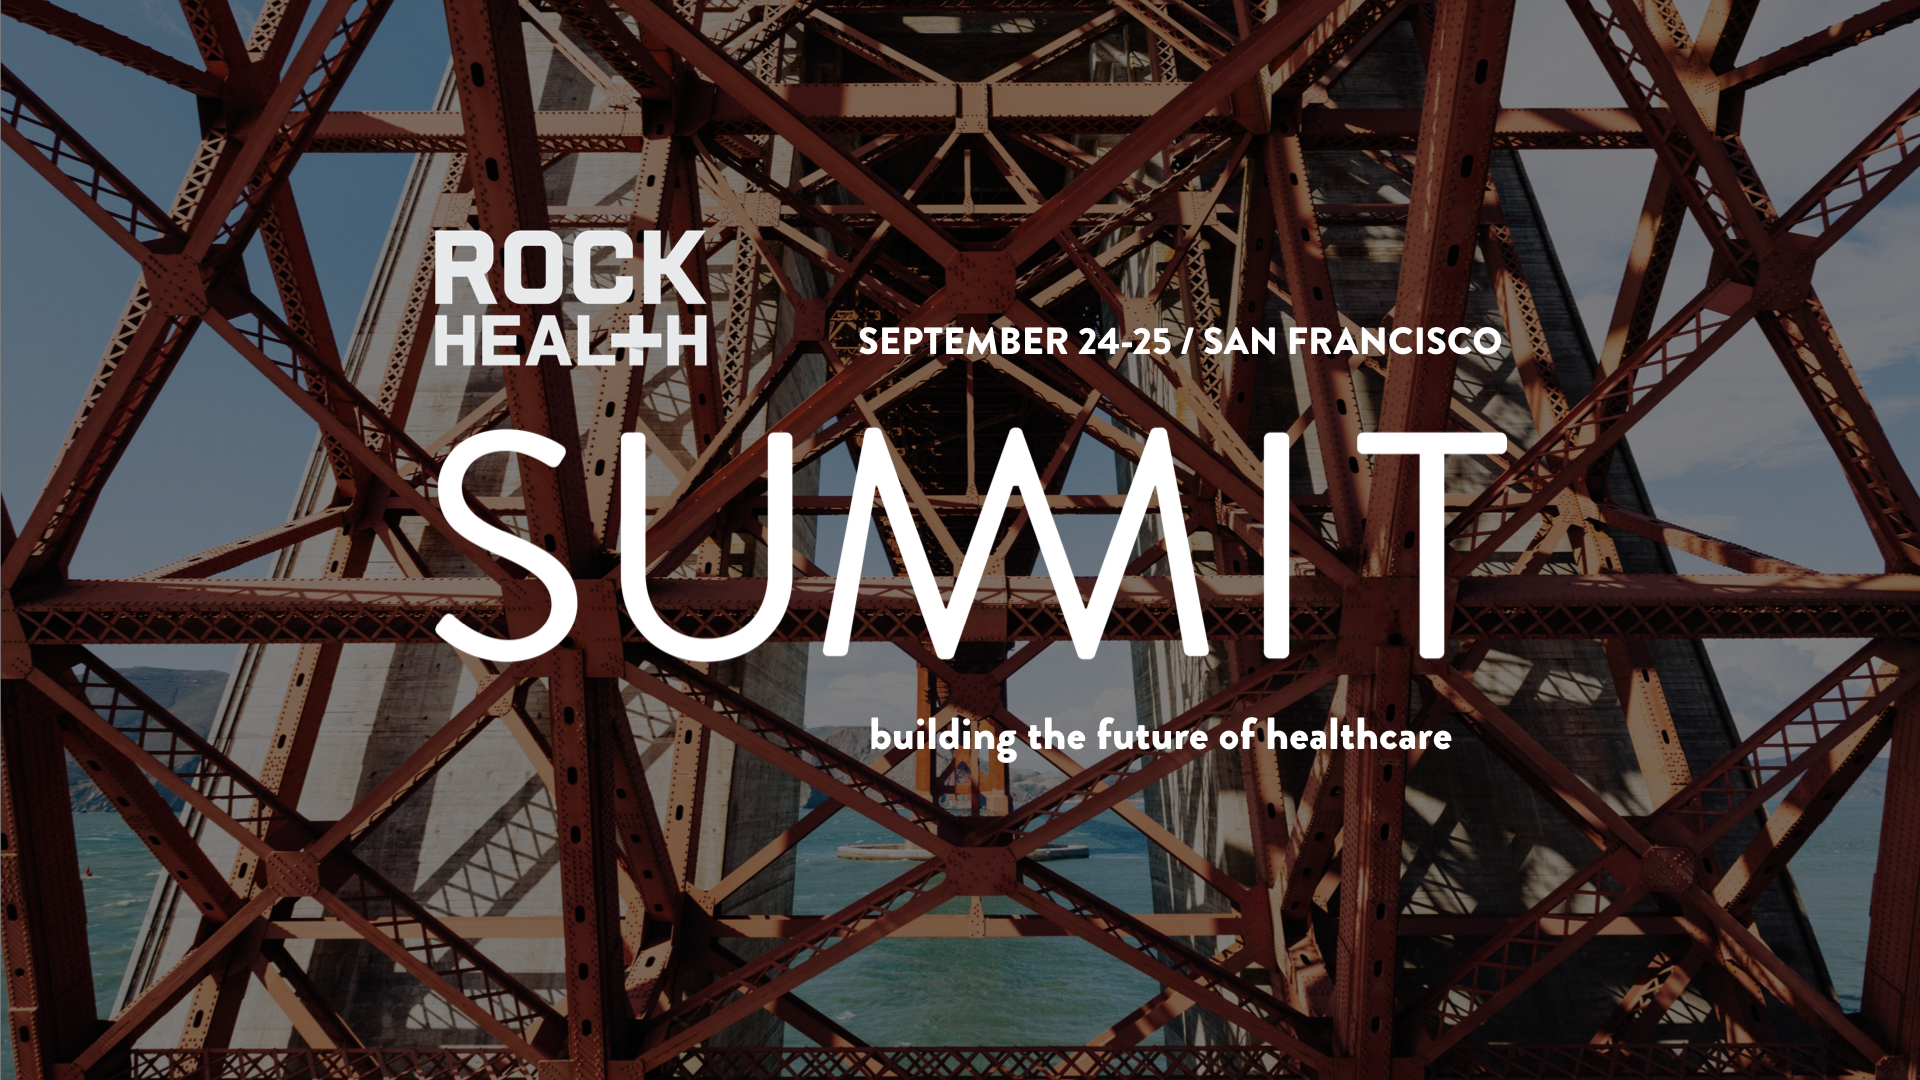 Nominate a patient, caregiver, or advocate to attend Rock Health Summit 2019